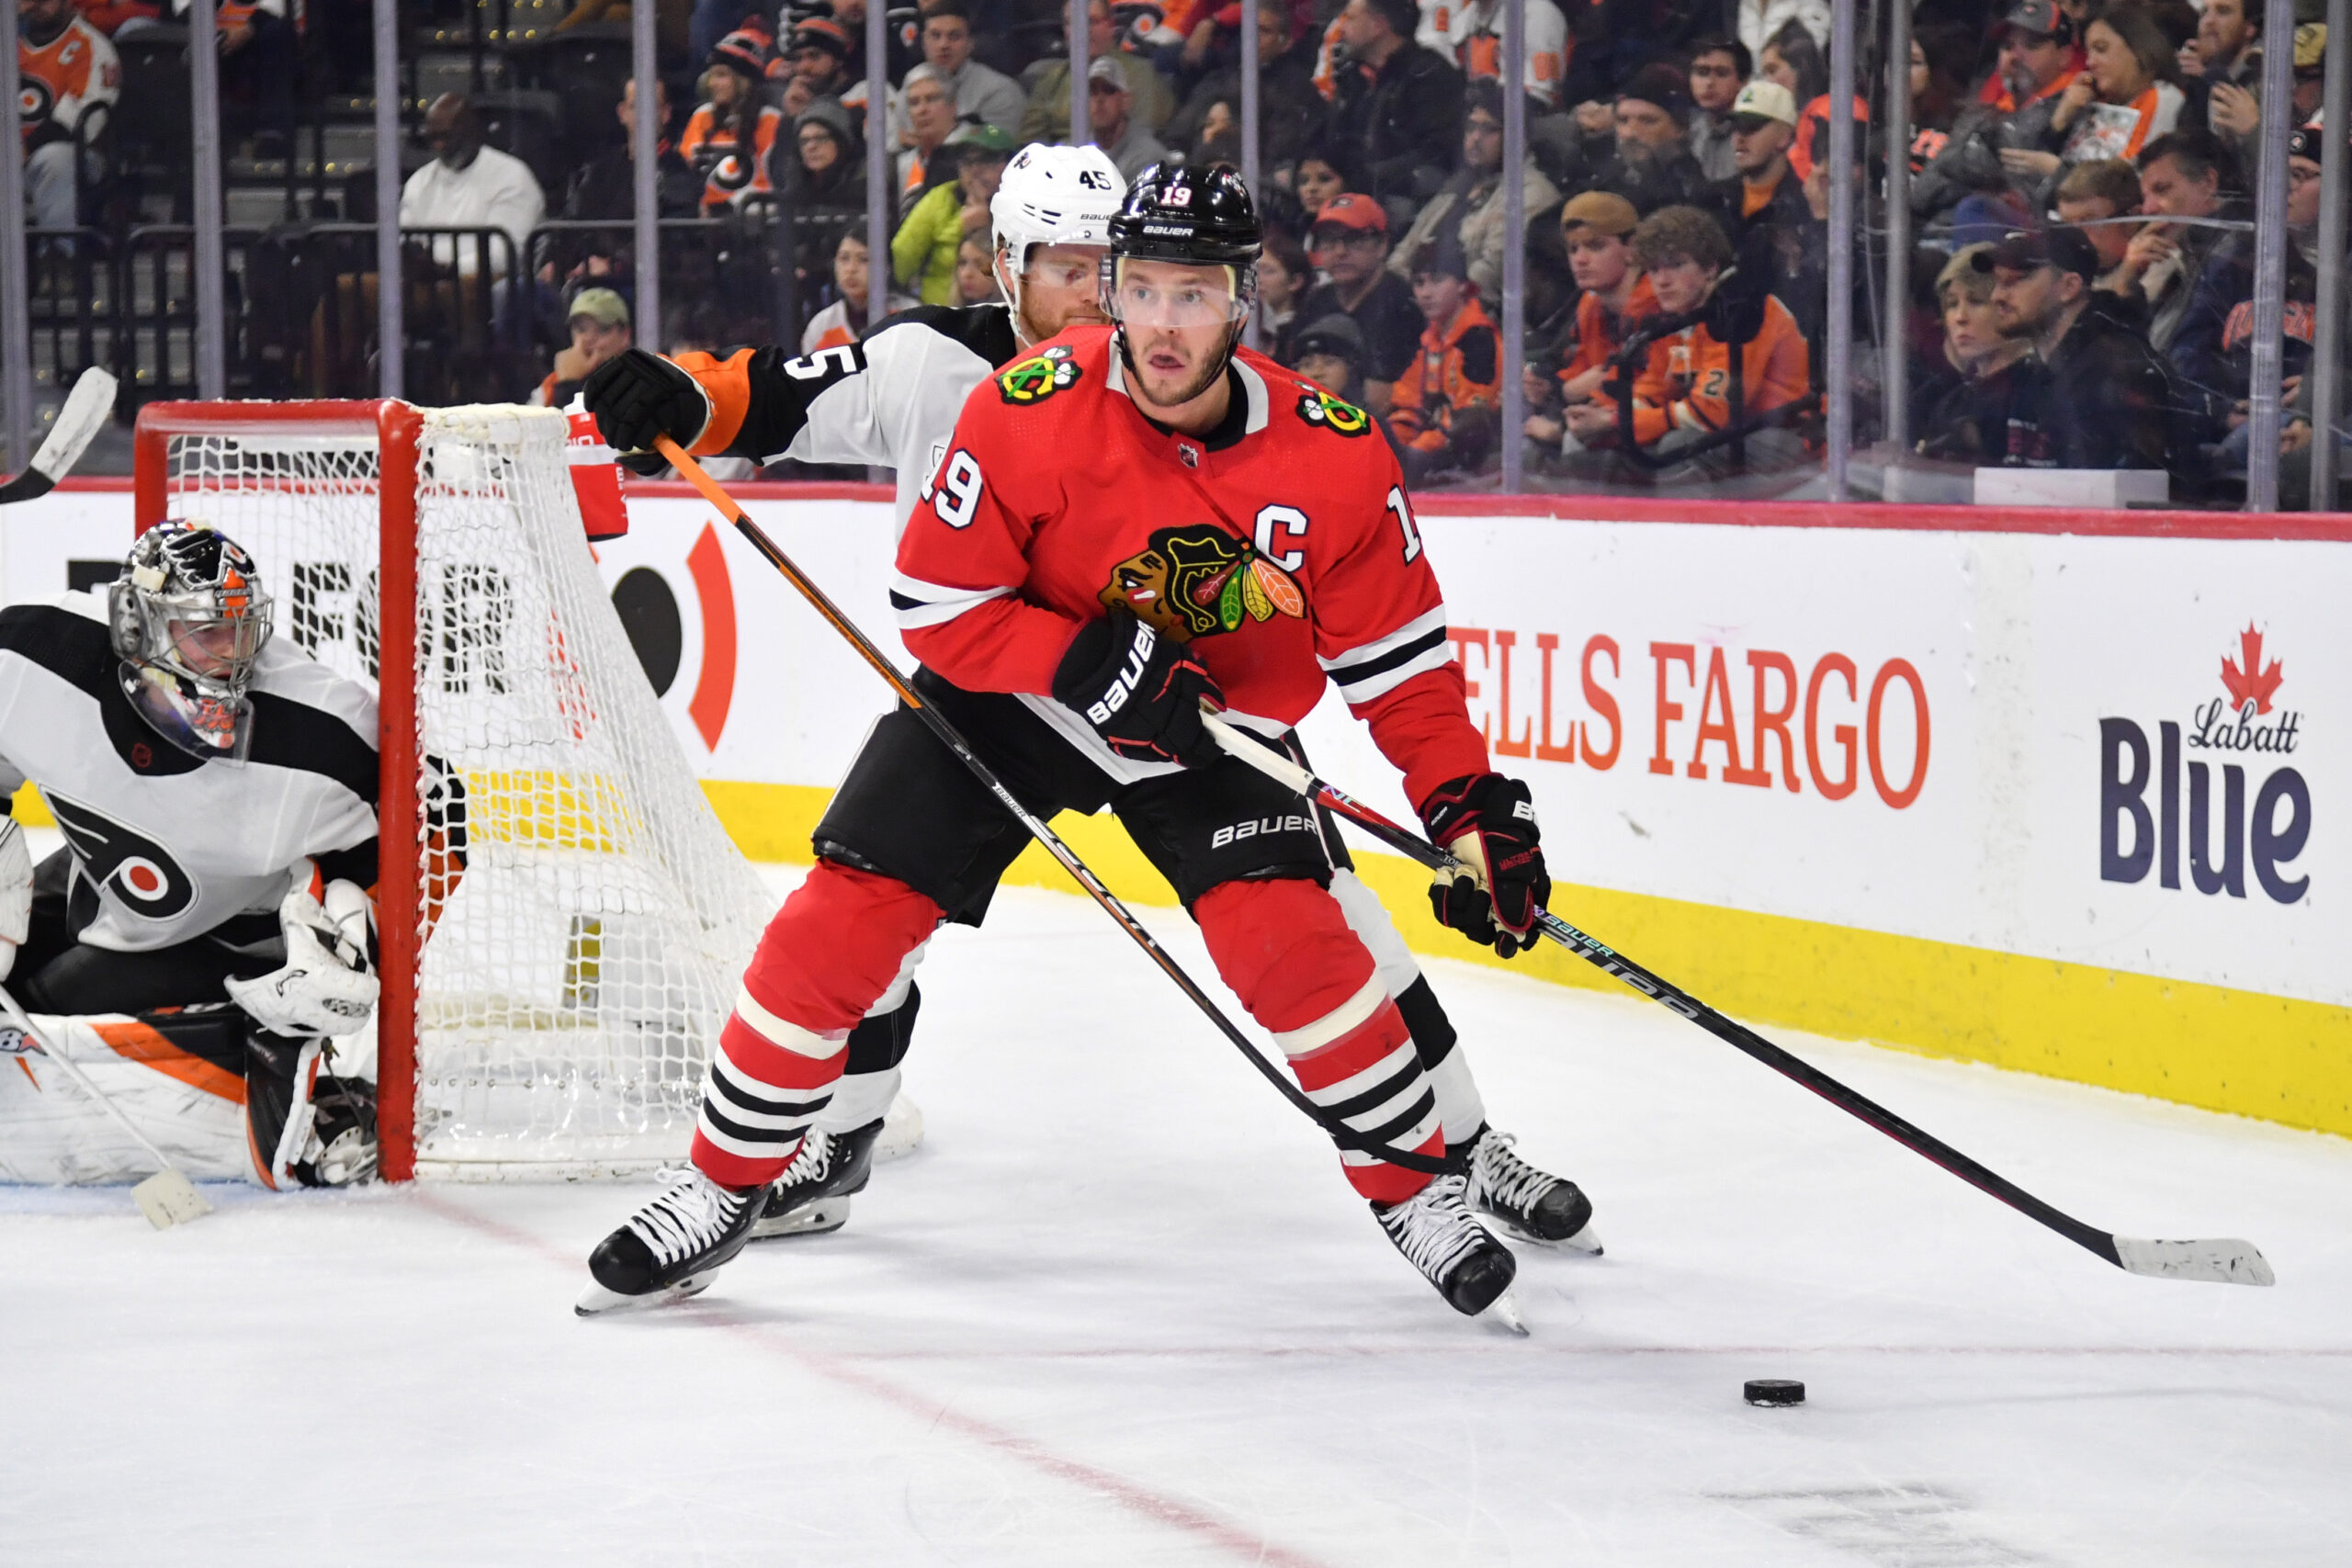 4 best free agent destinations for Jonathan Toews